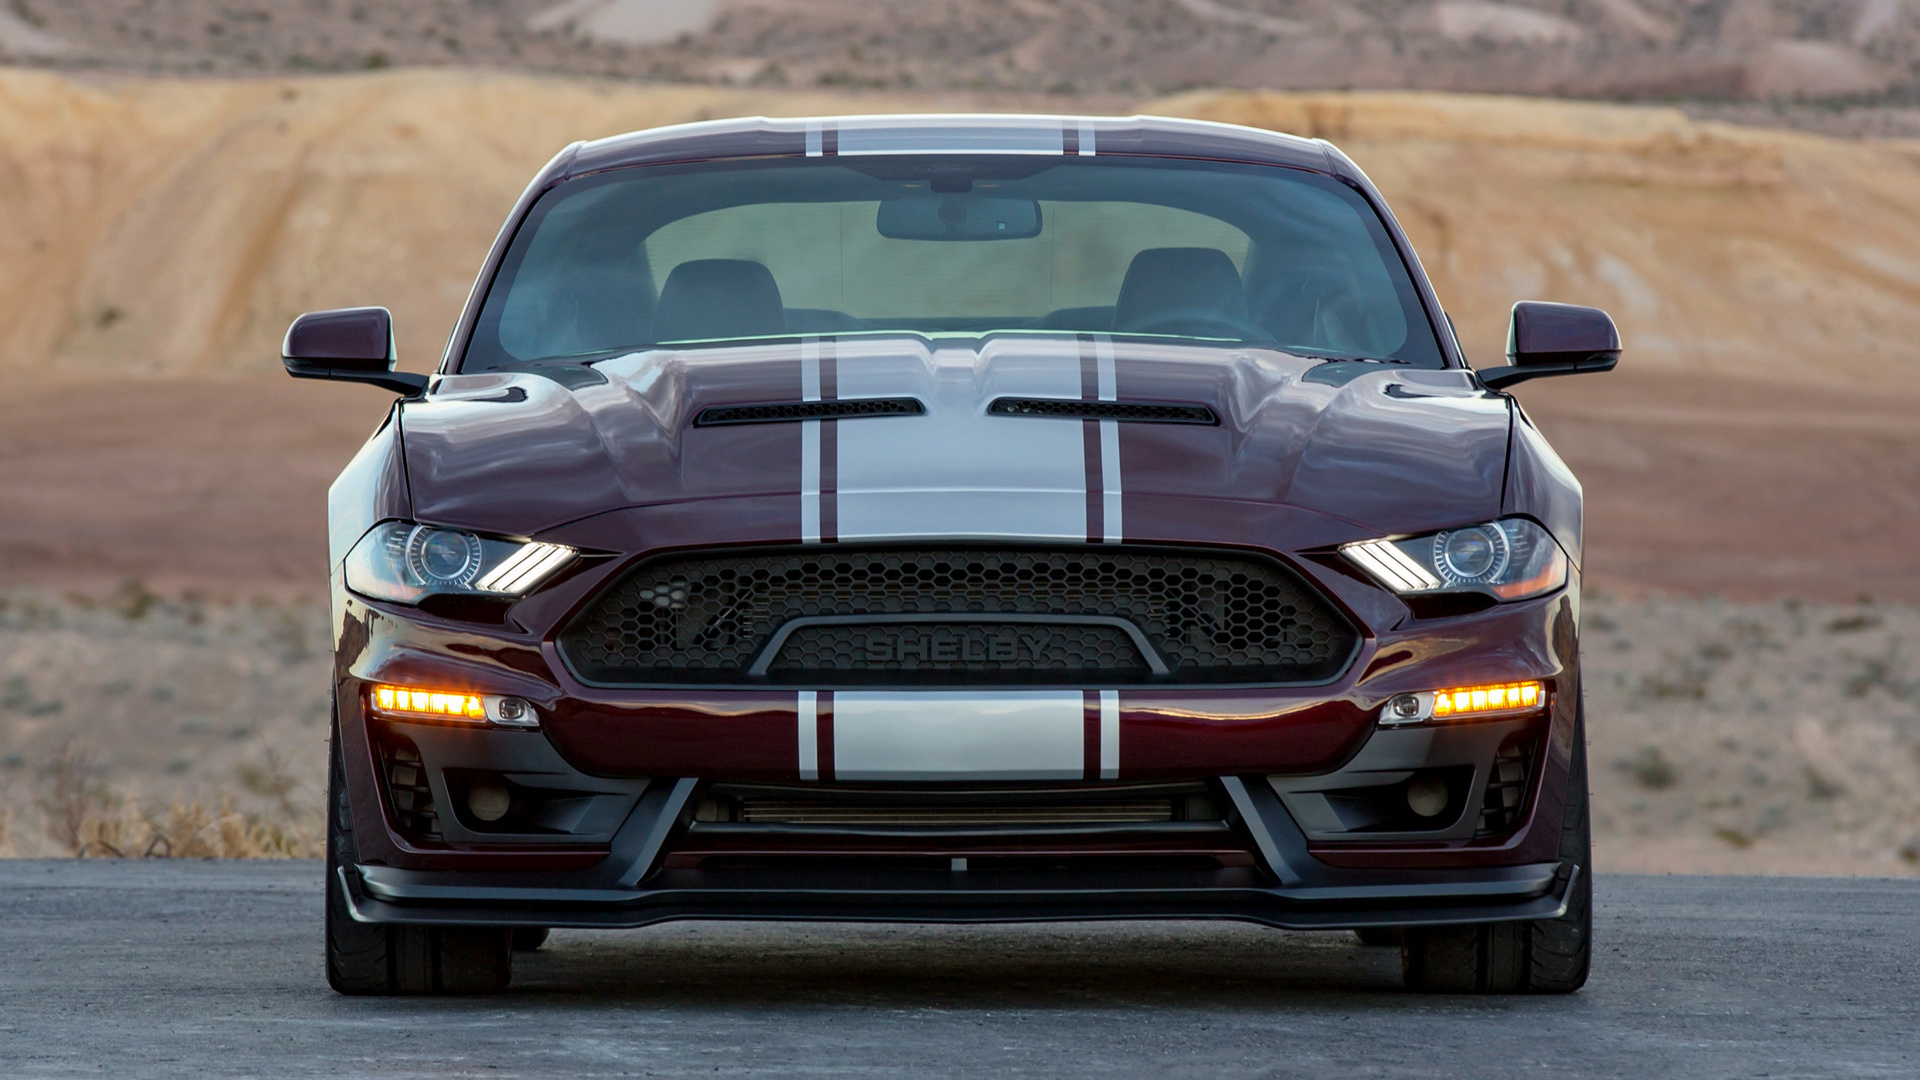 Vehicles Shelby Super Snake HD Wallpaper | Background Image